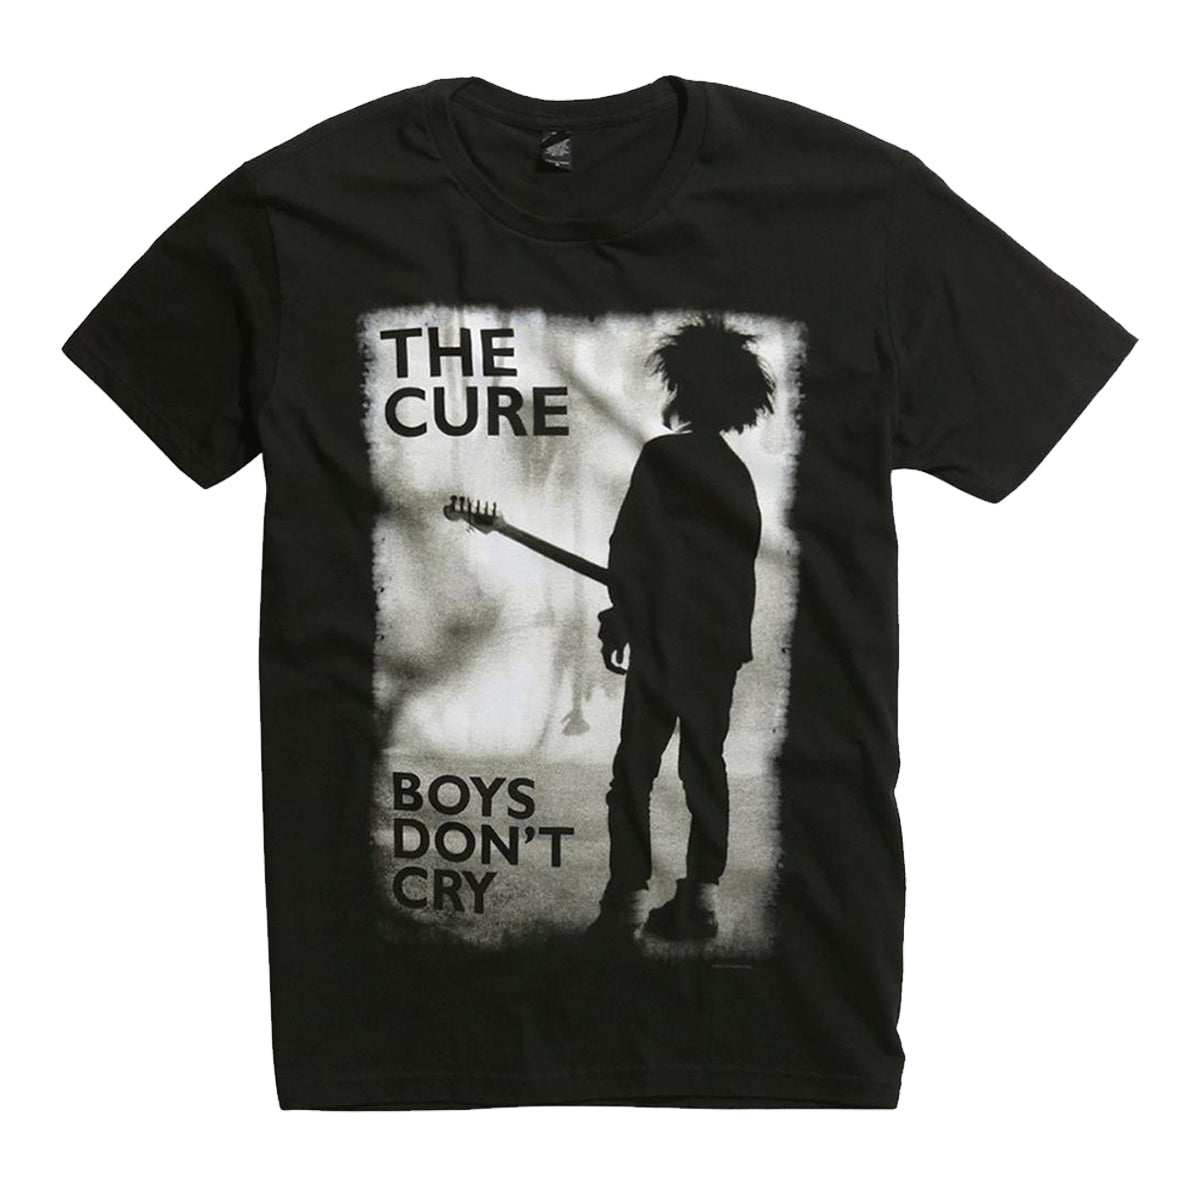 The Cure Boys Don't Cry Standard Tee